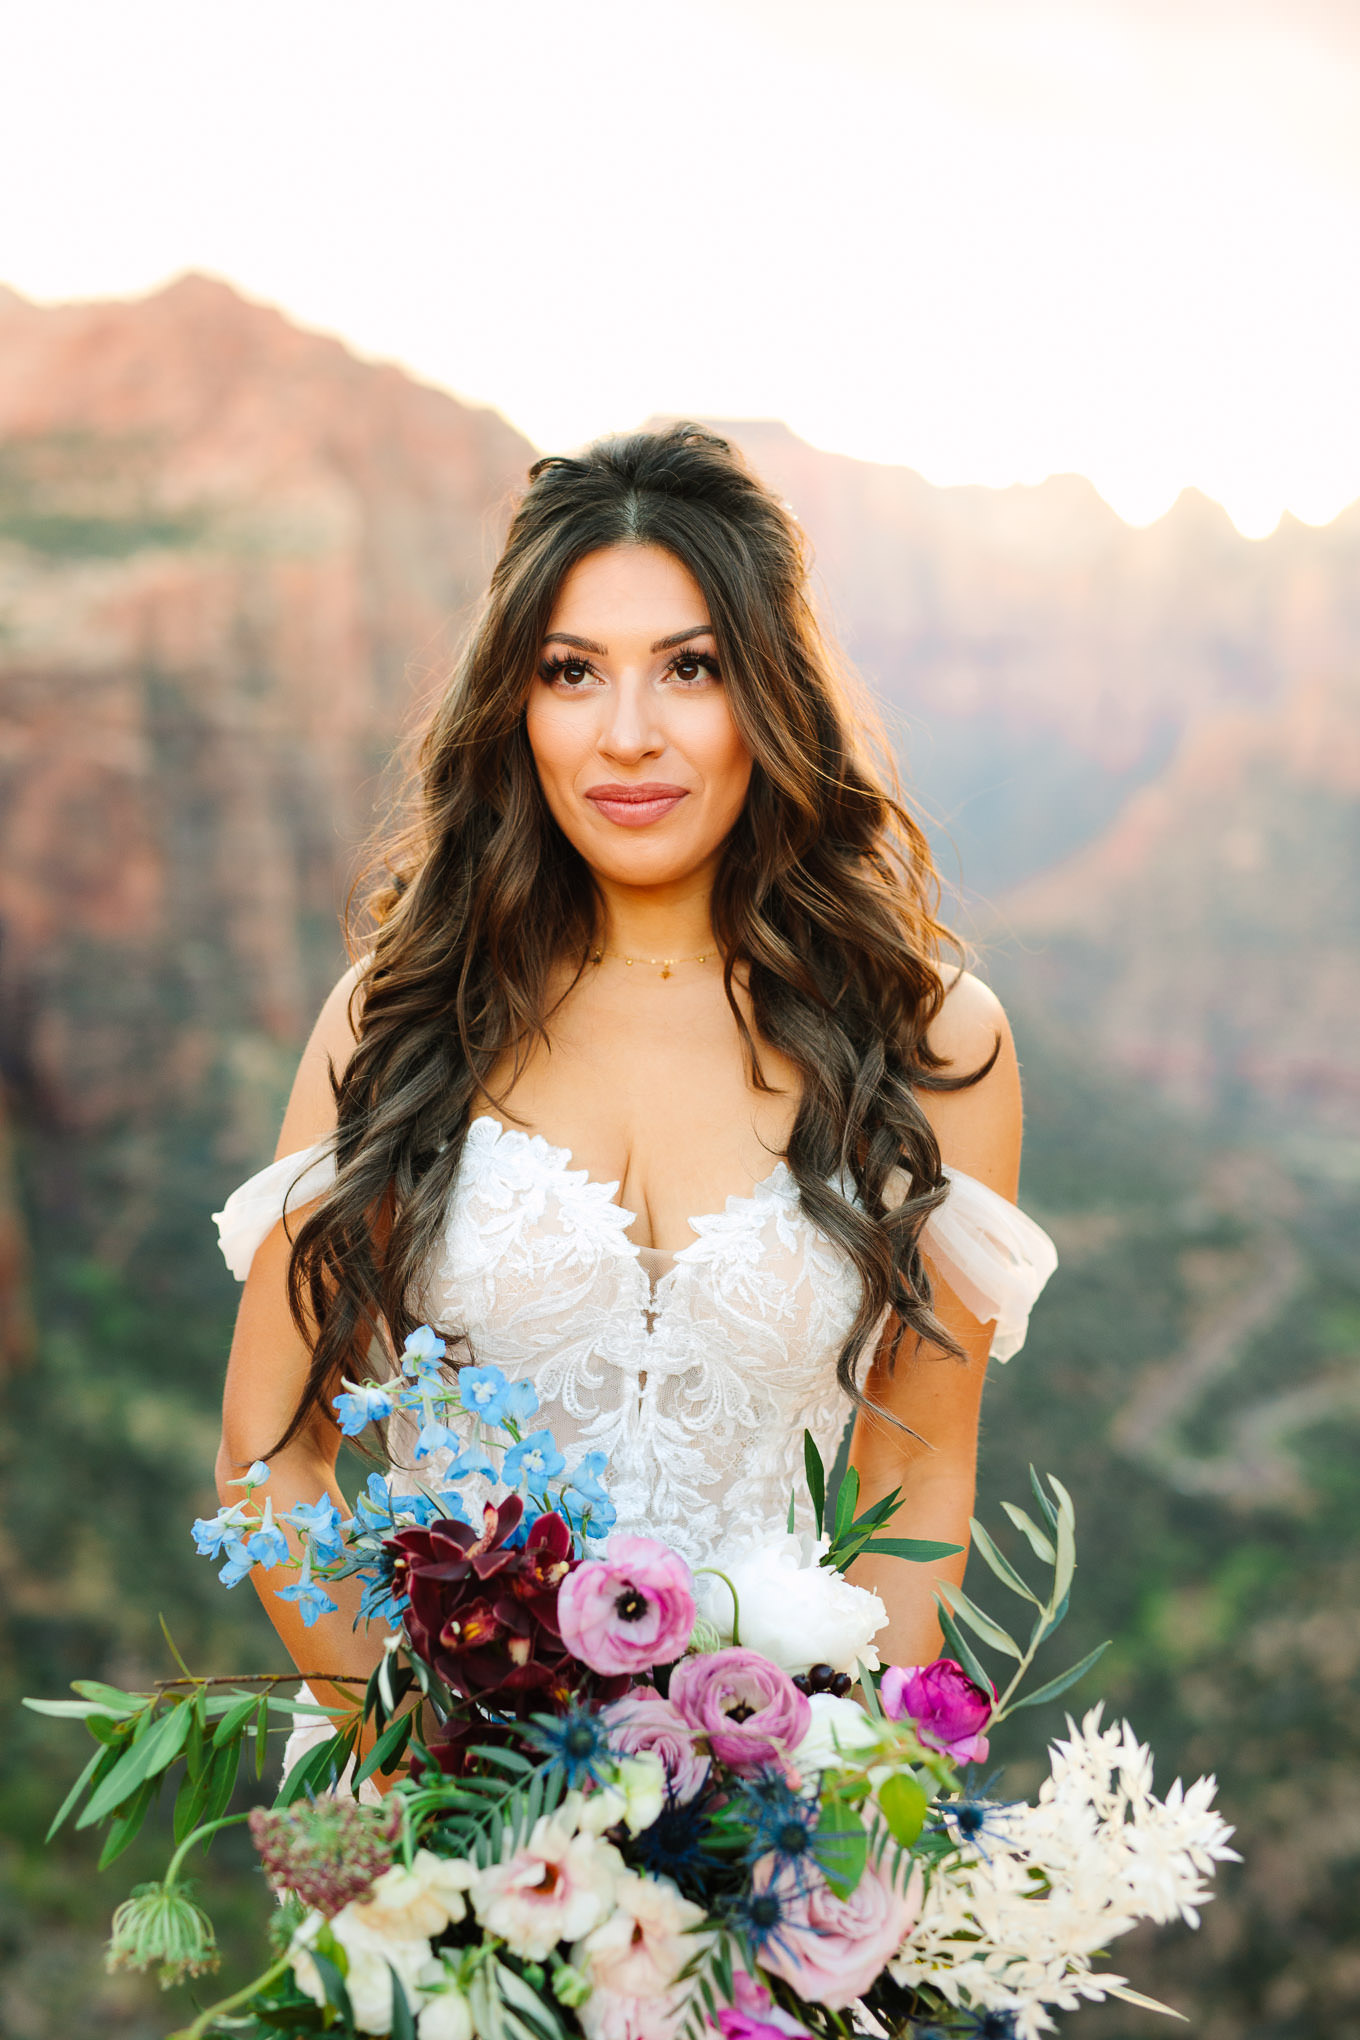 Gorgeous bride in off the shoulder gown | Zion National Park sunset elopement scenic overlook | Colorful adventure elopement photography | #utahelopement #zionelopement #zionwedding #undercanvaszion   Source: Mary Costa Photography | Los Angeles